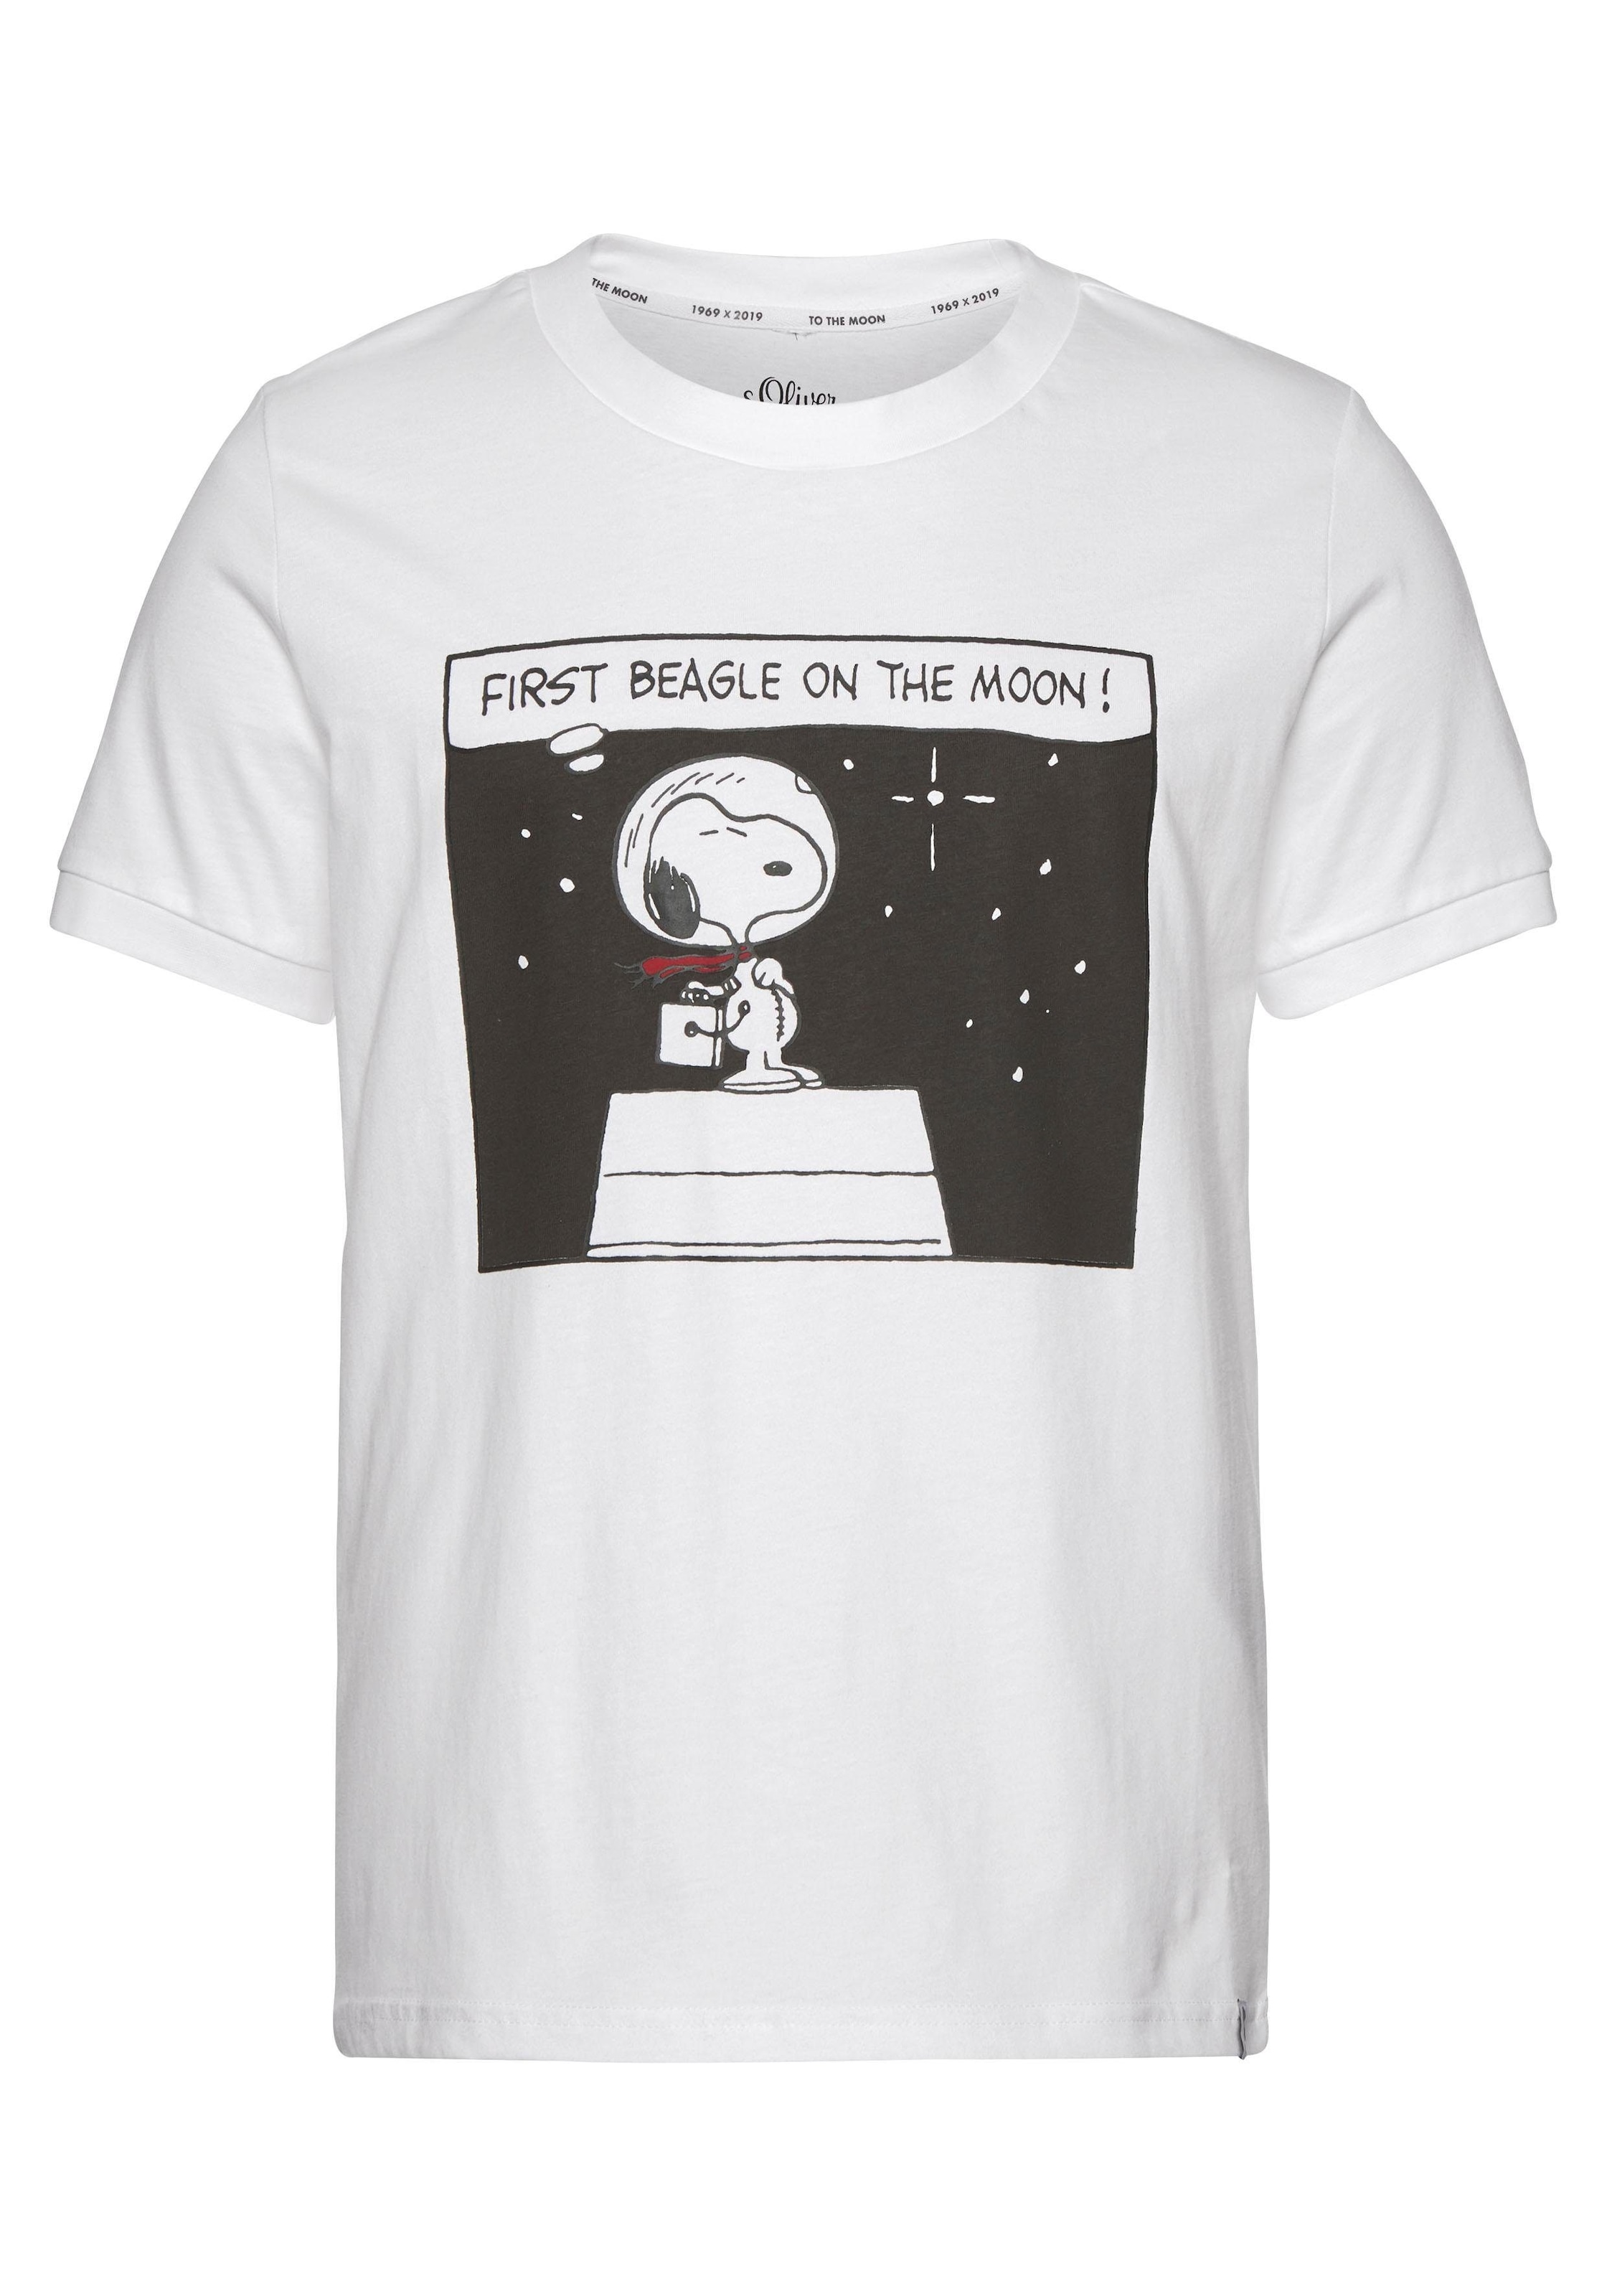 Print s.Oliver Snoopy mit bei T-Shirt,